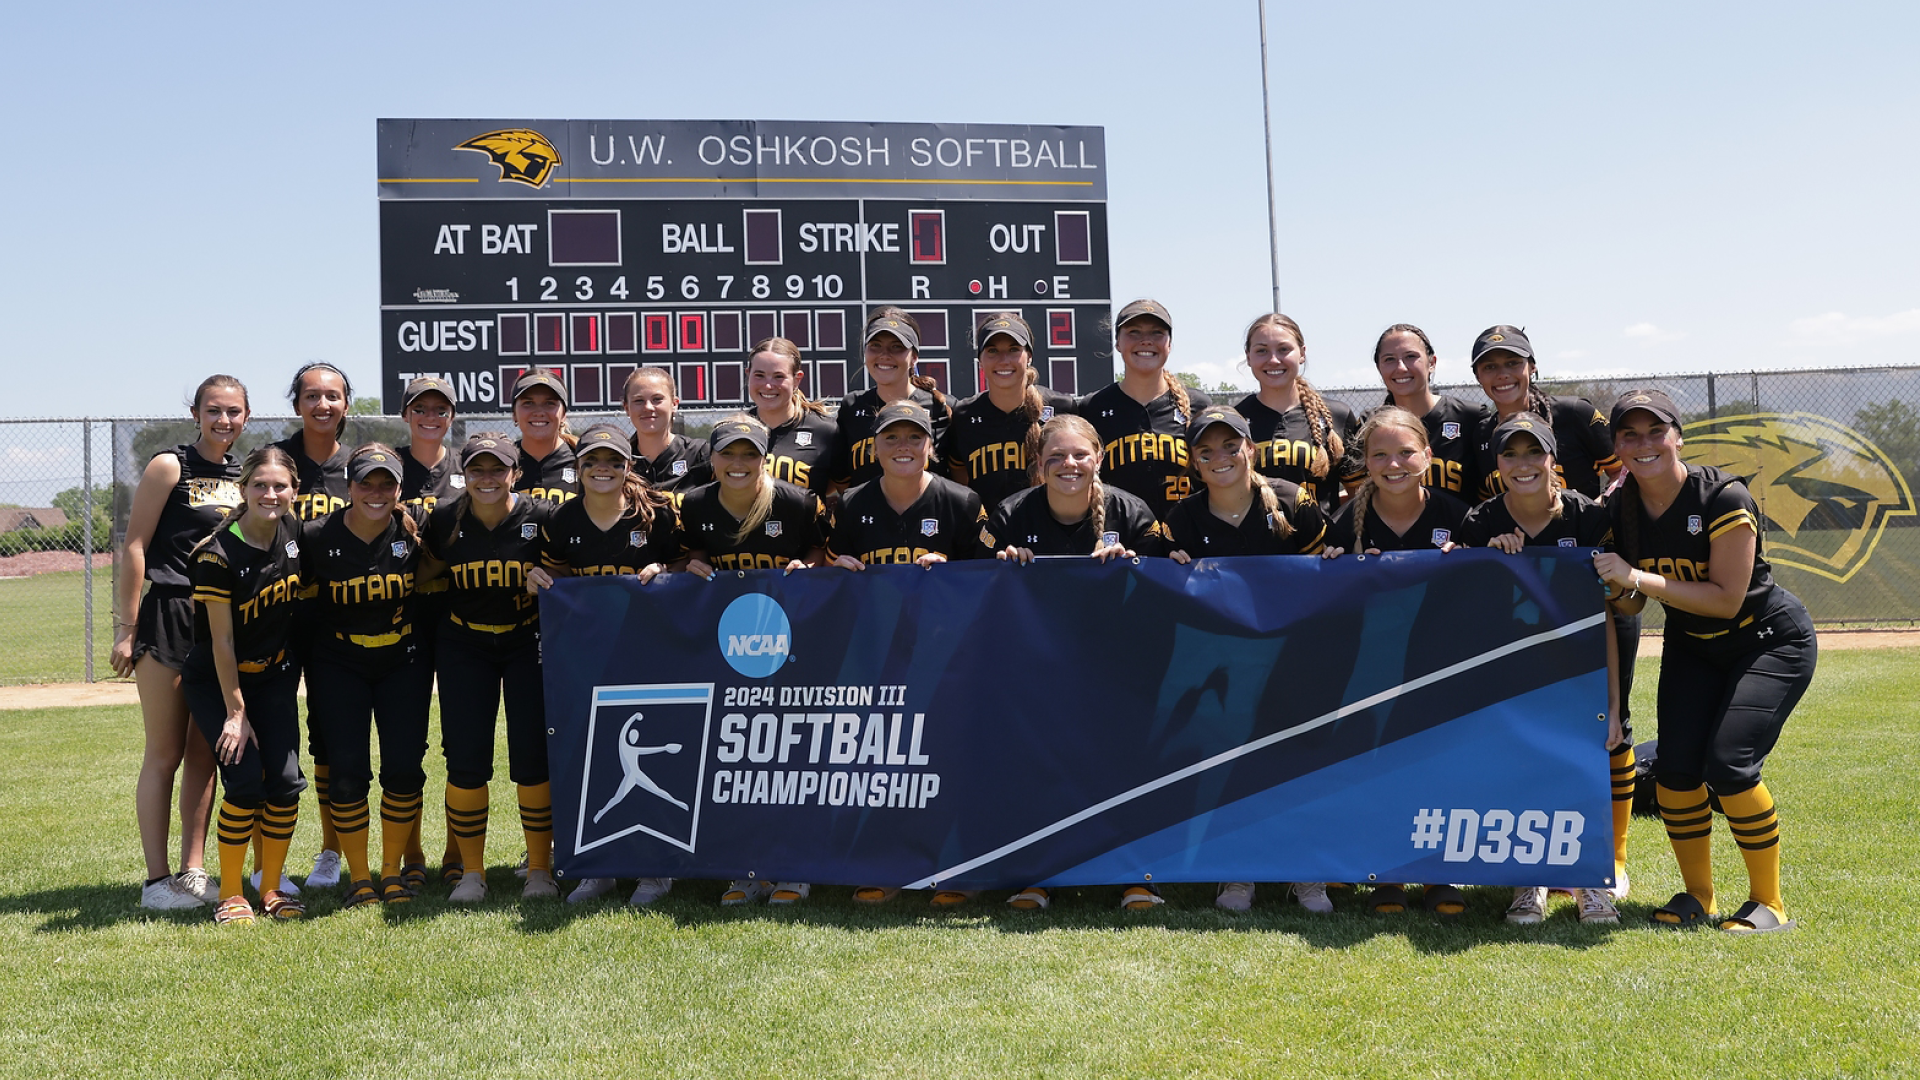 The Titans won their fourth regional title in program history on Saturday. Photo Credit: Steve Frommell, UW-Oshkosh Sports Information